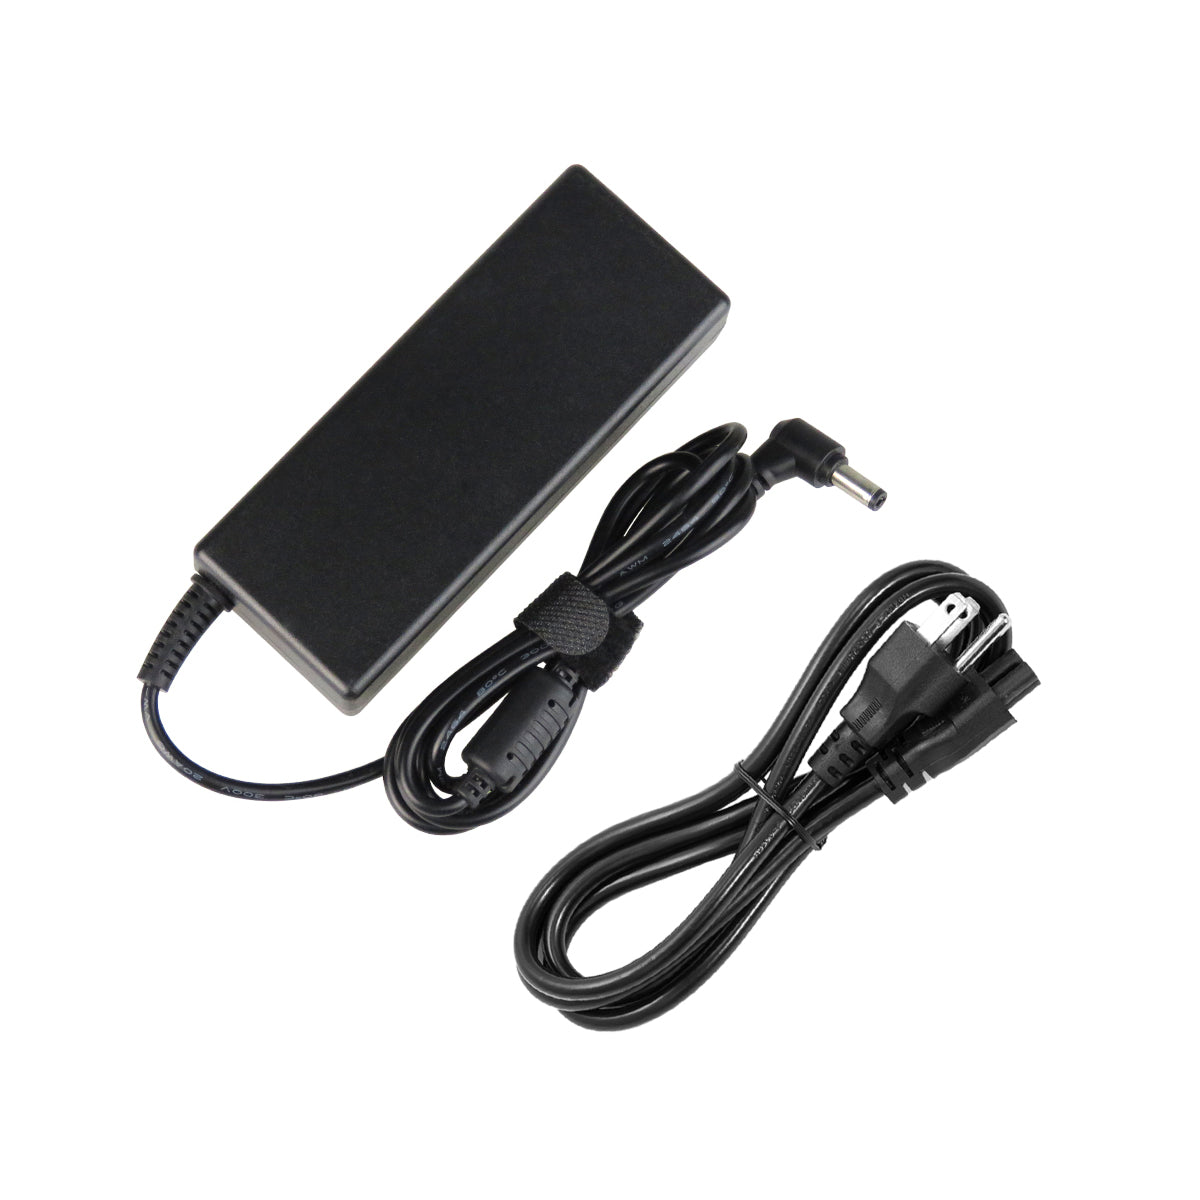 AC Adapter Charger for ASUS X88VD Notebook.